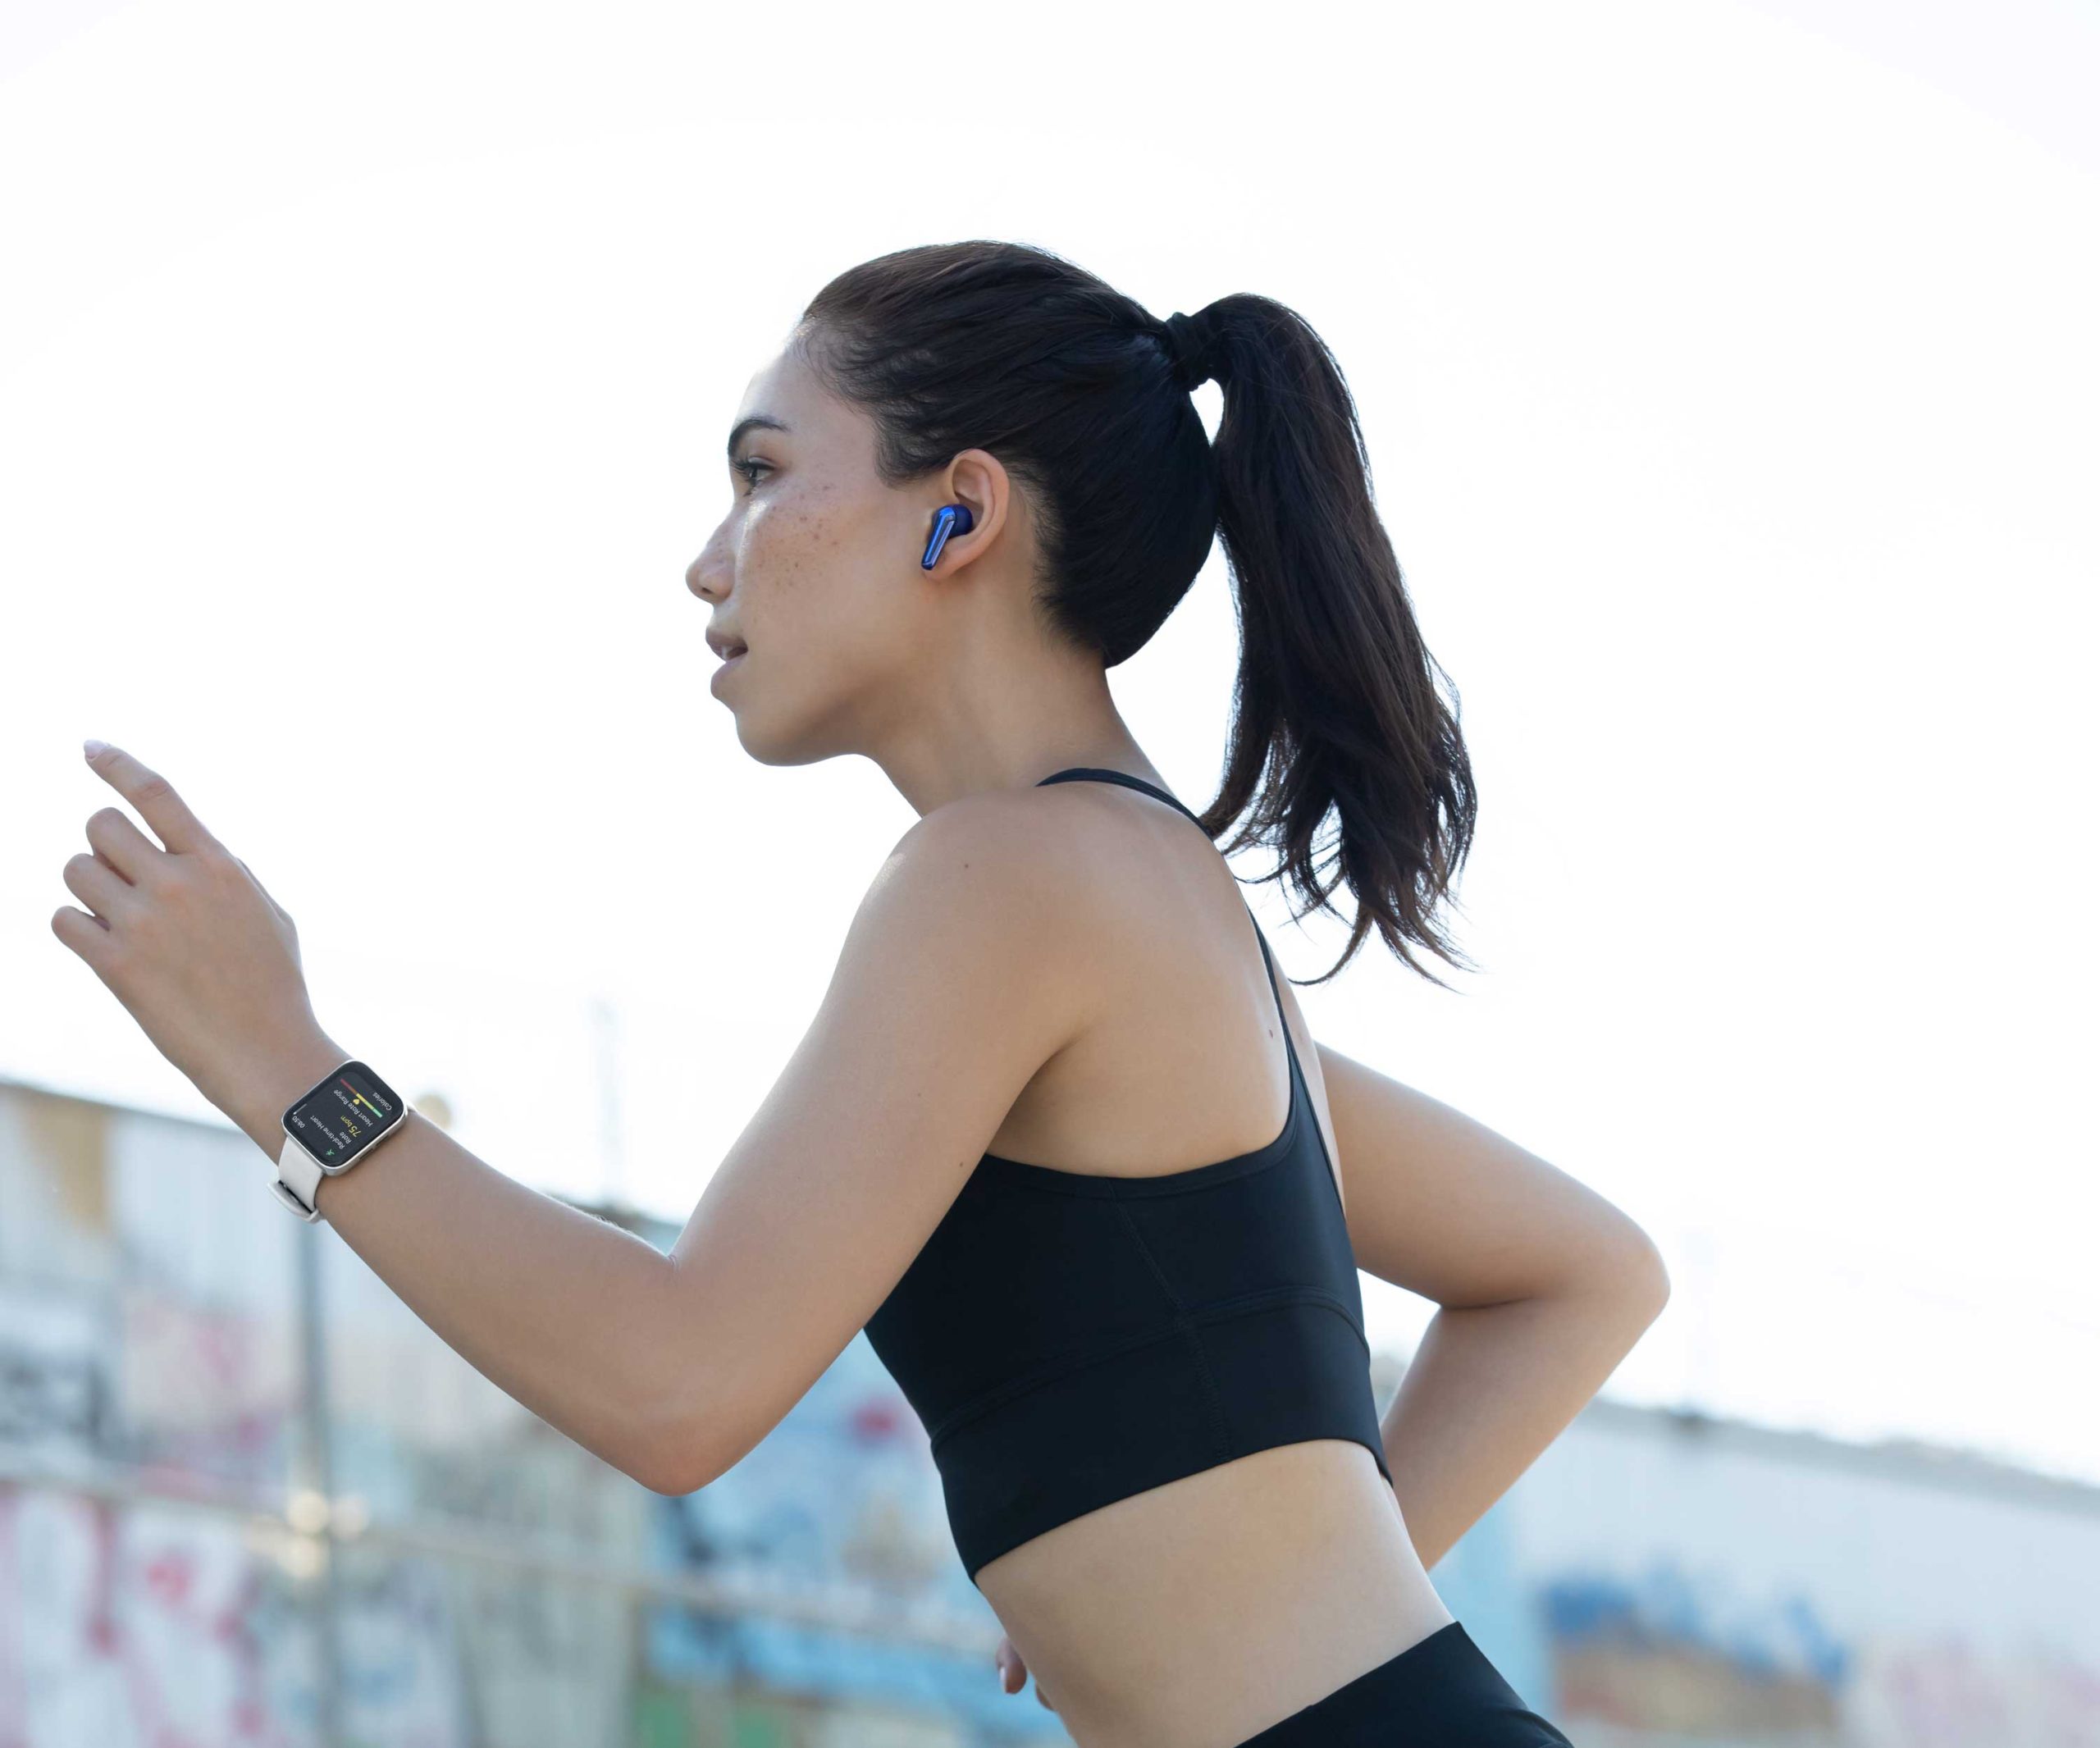 BEST FOR EXERCISE. With more than 100 sports modes to track your exercise routines, the realme smartwatch 3 is the perfect fitness companion.